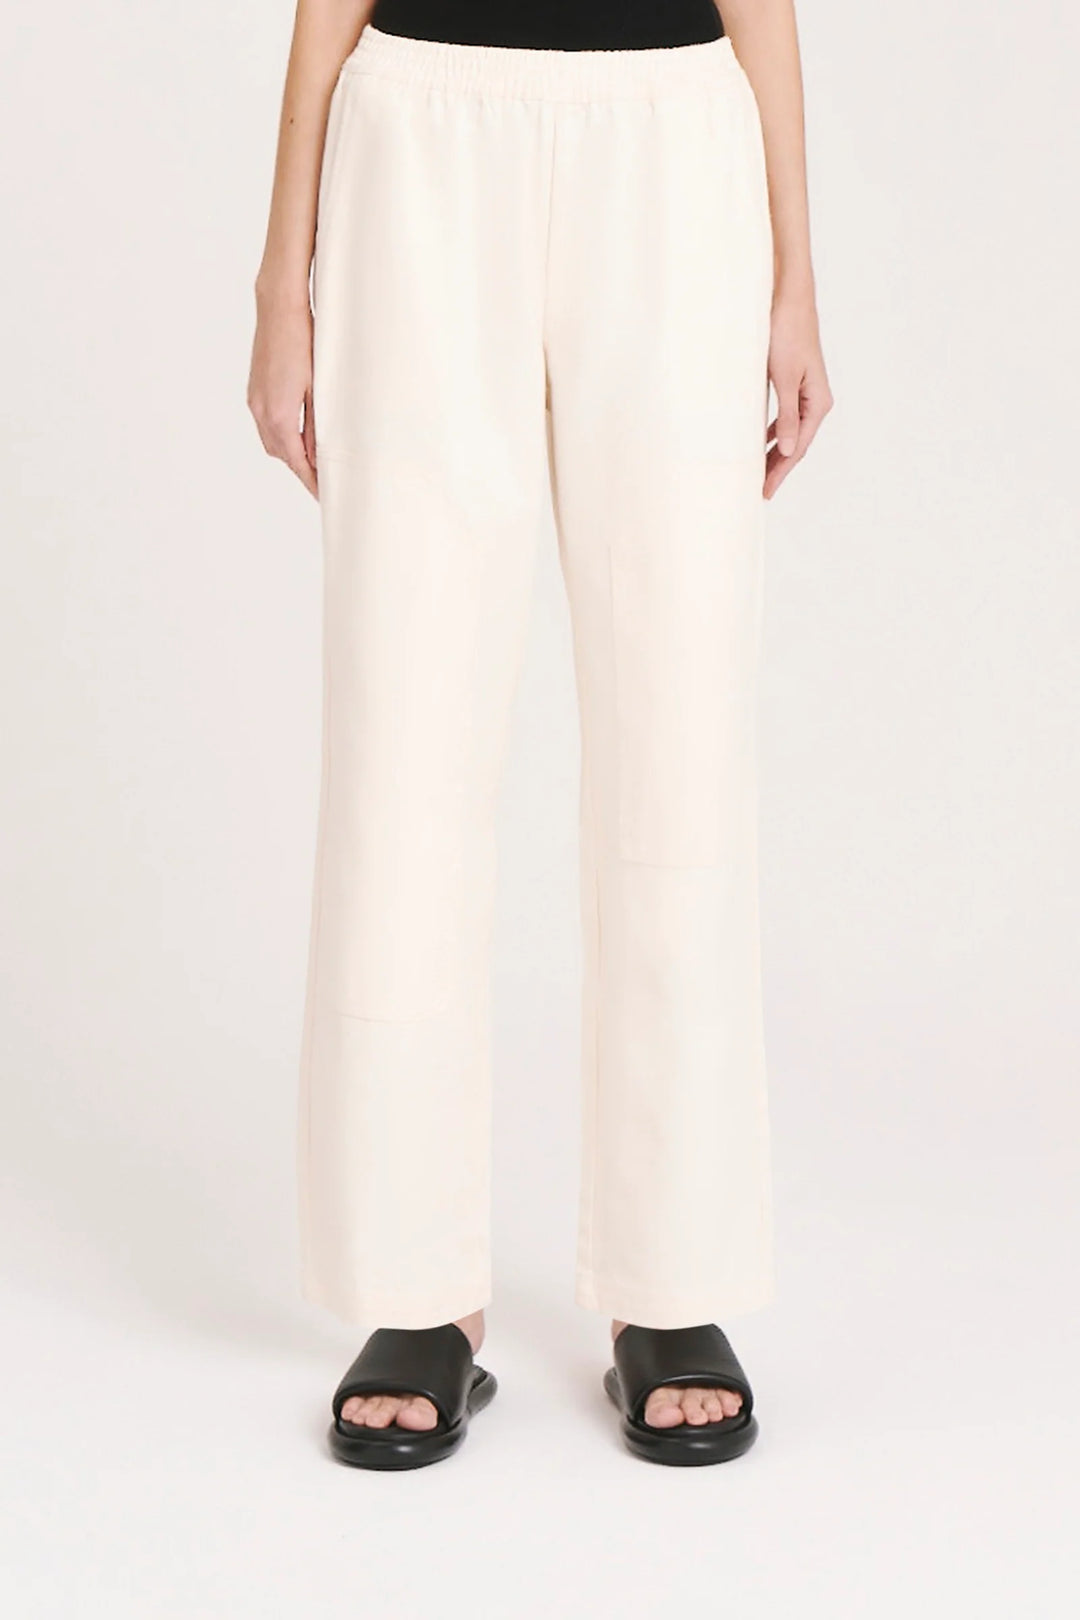 Nude Lucy Margo Utility Pant - Cloud